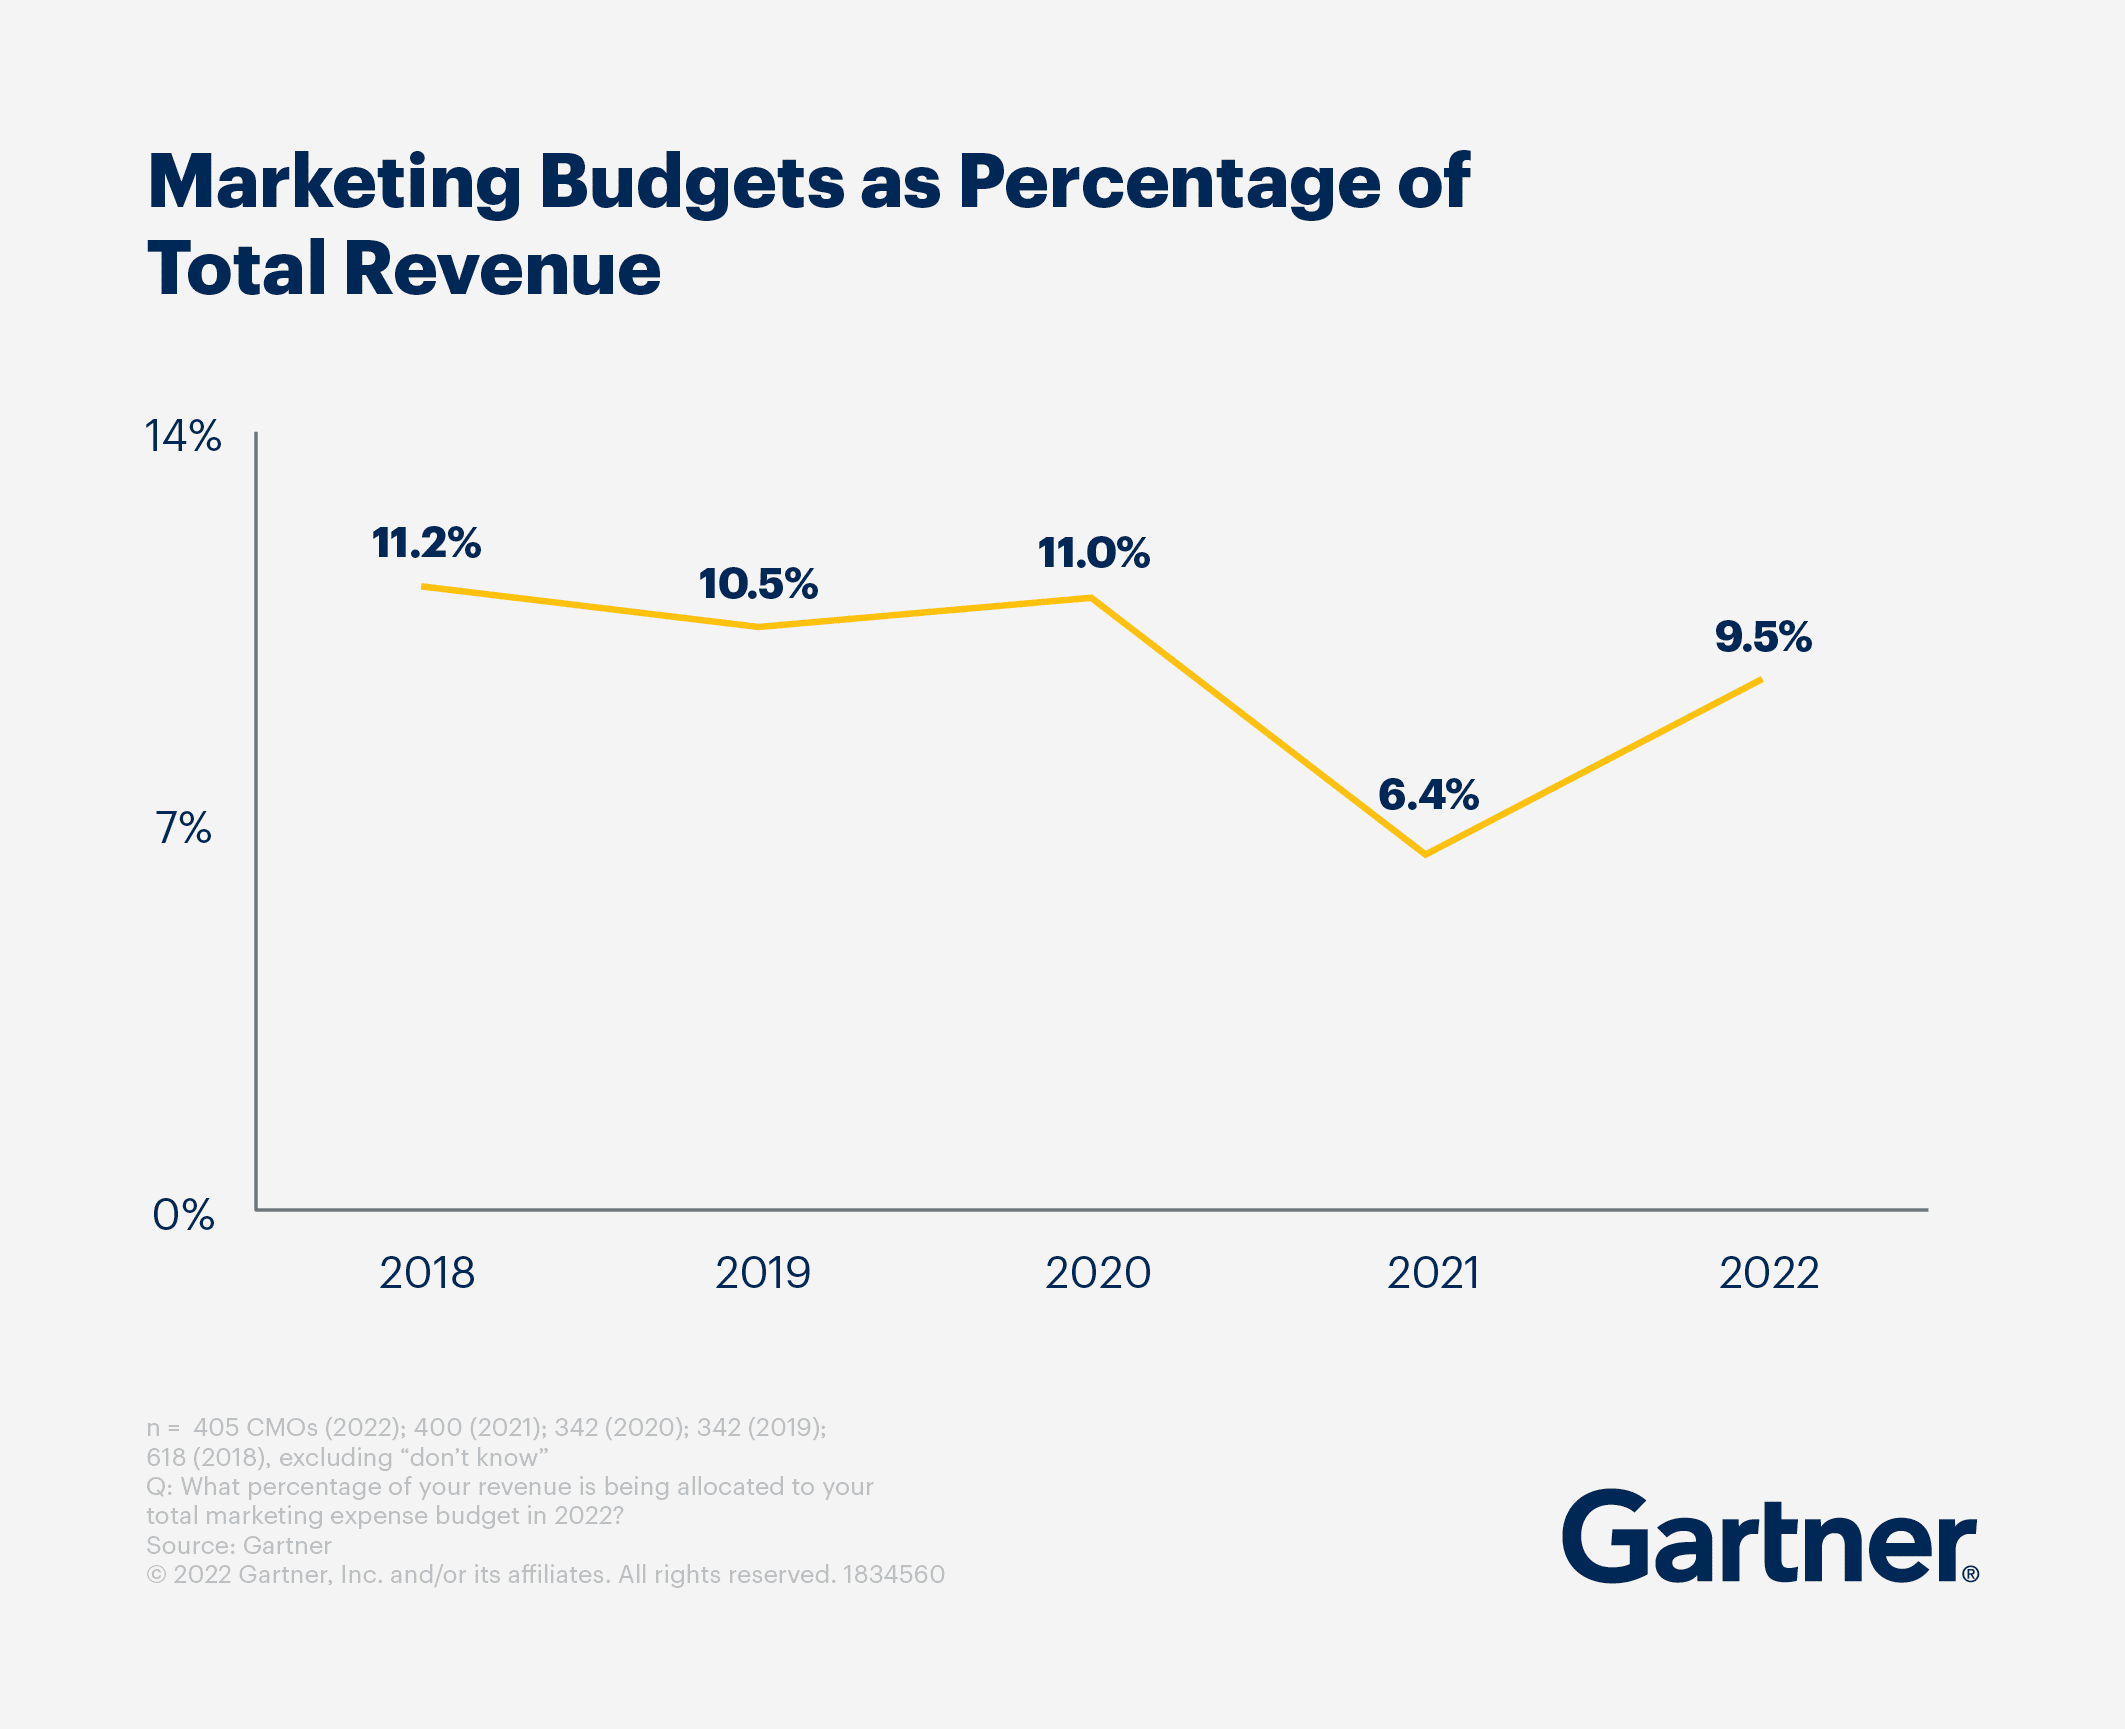 Marketing budgets as a percentage of total revenue have shown a resurgence.